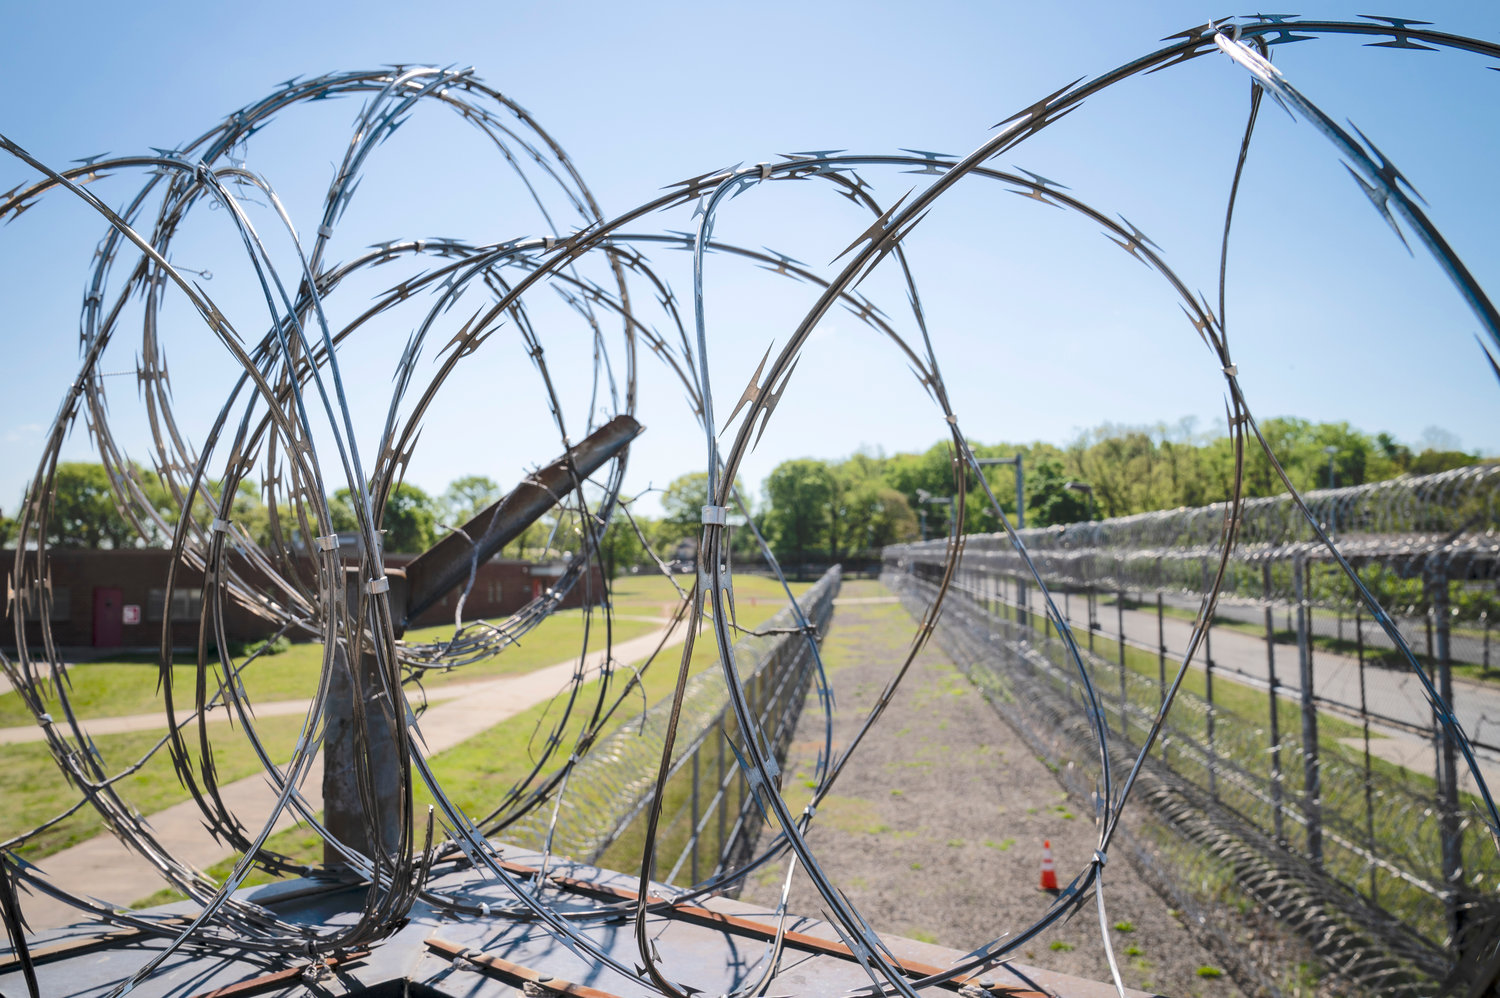 Razor wire surrounds the perimeter fencing at the former Arthur Kill Correctional Facility, Tuesday, May 11, 2021, in the Staten Island borough of New York. The facility was purchased by Broadway Stages in 2017 and has been transformed into a film and television studio. Much of the prison was preserved as a set, lending authenticity to scenes in productions.